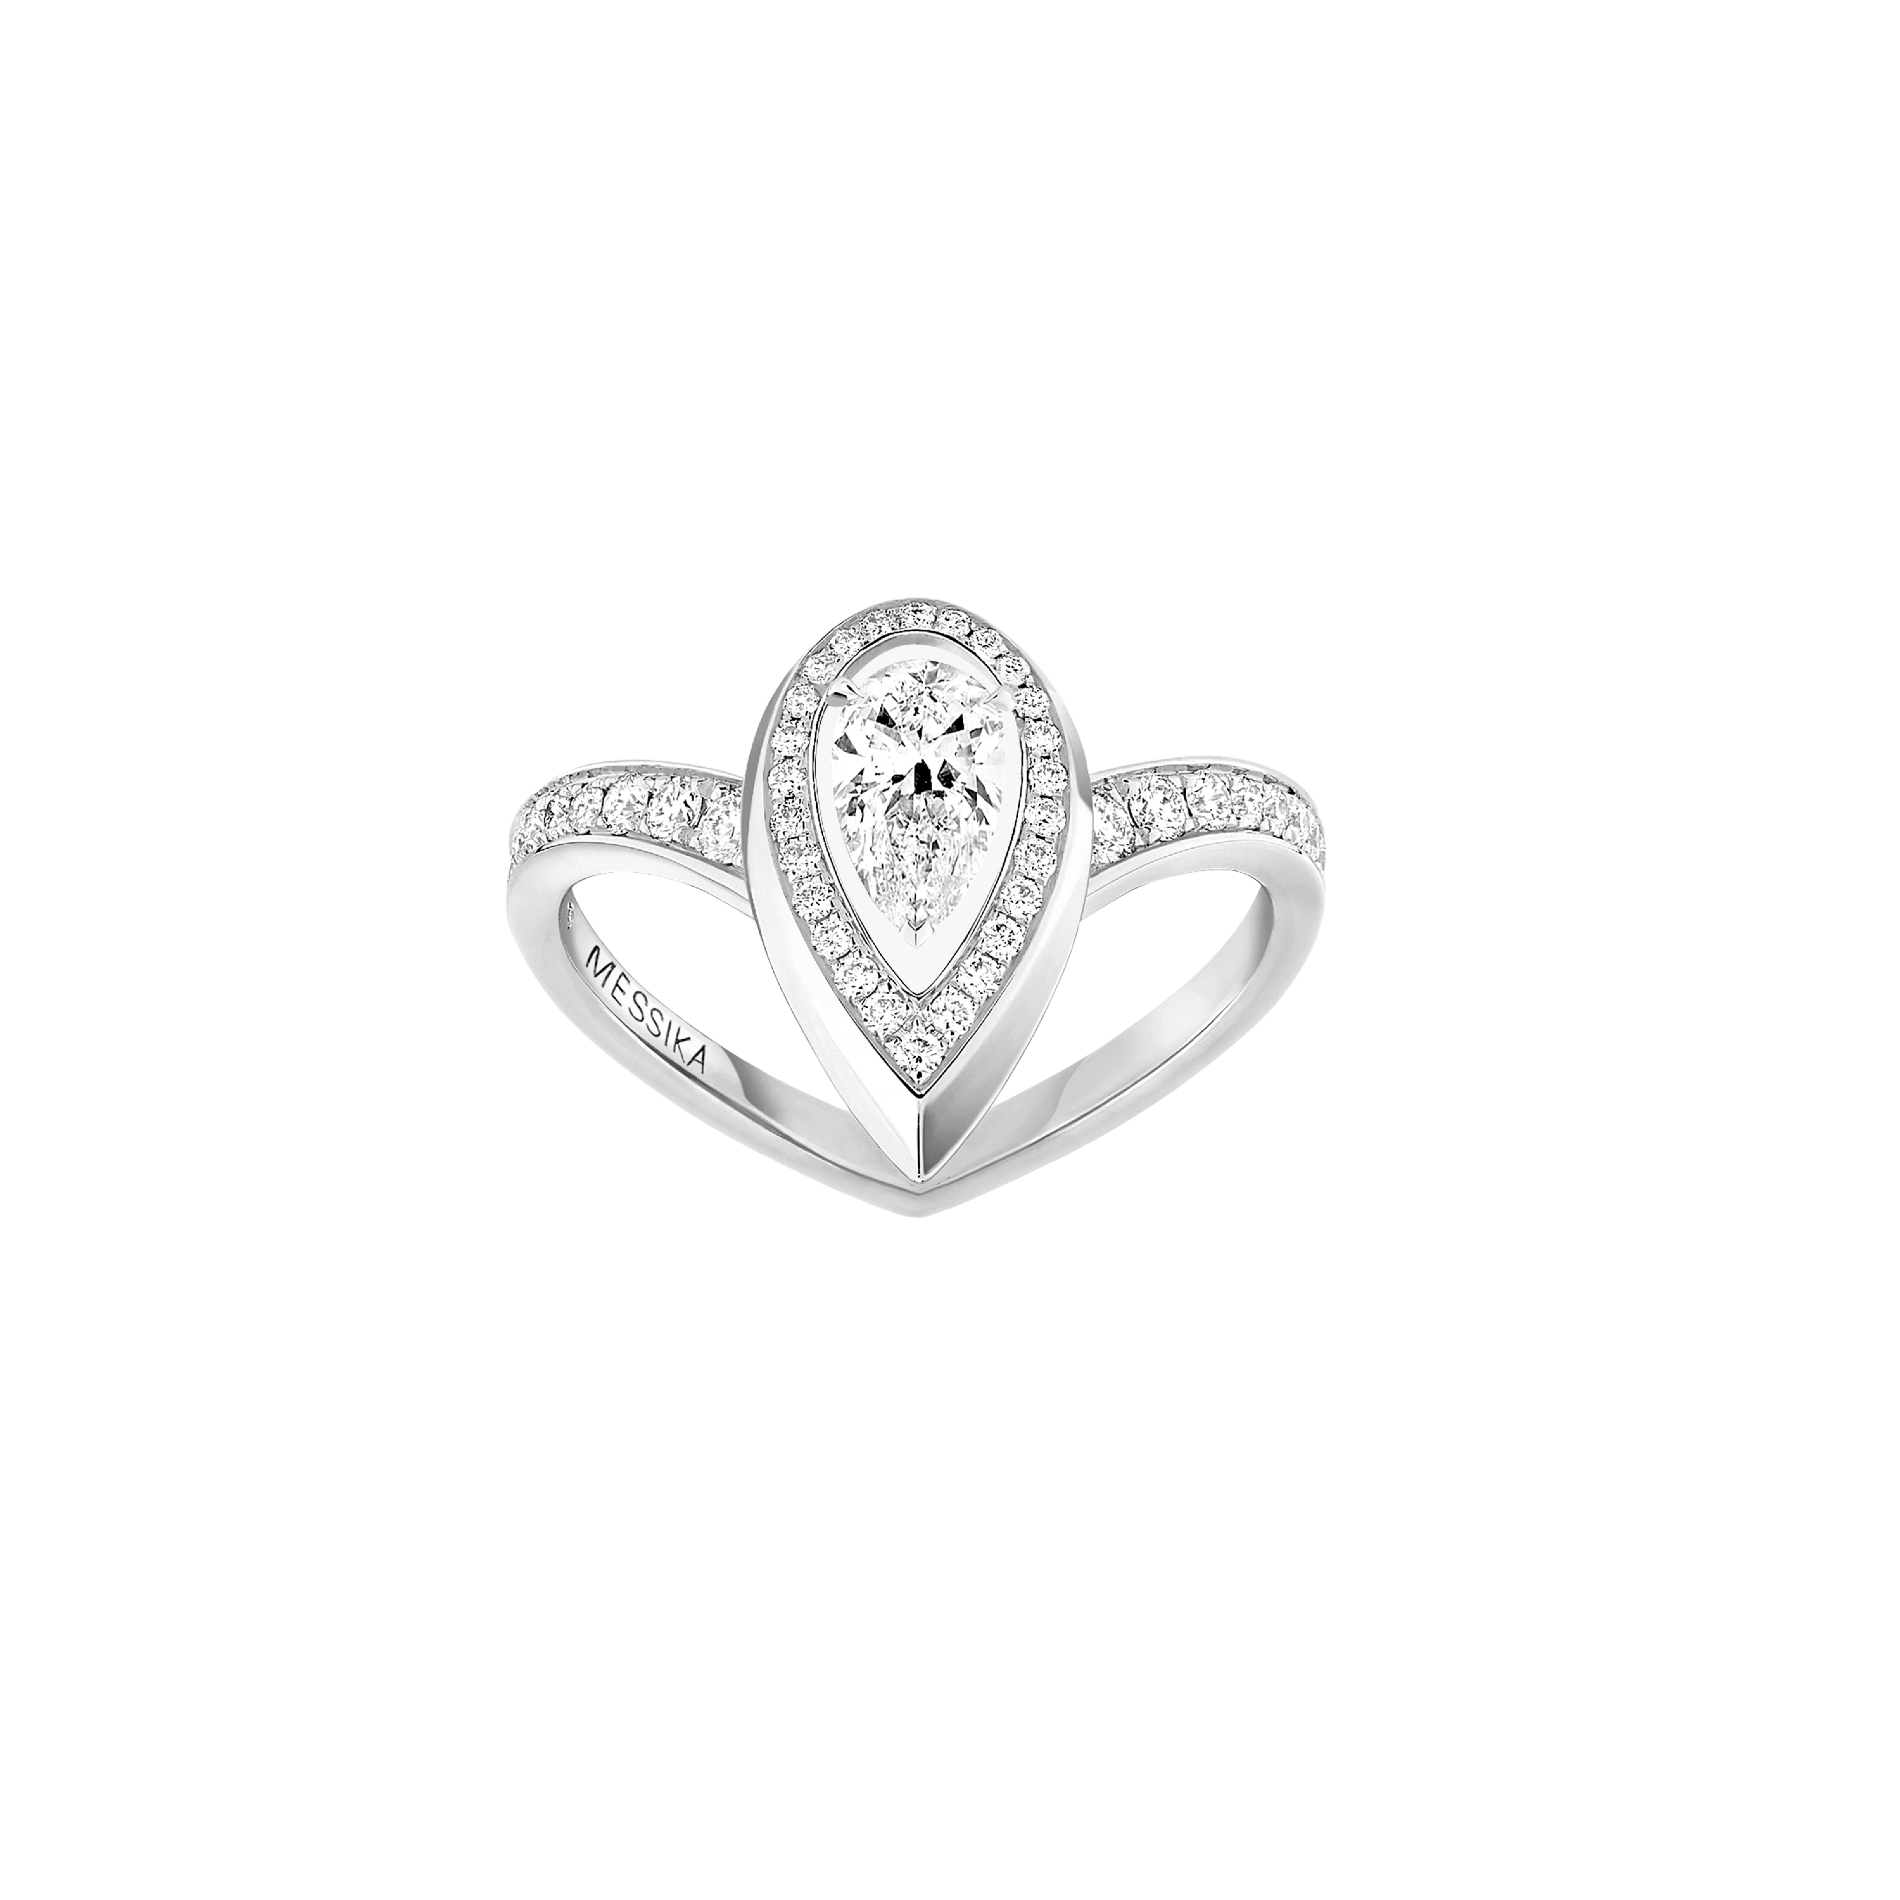 Bague diamant or blanc fiery 0,30ct